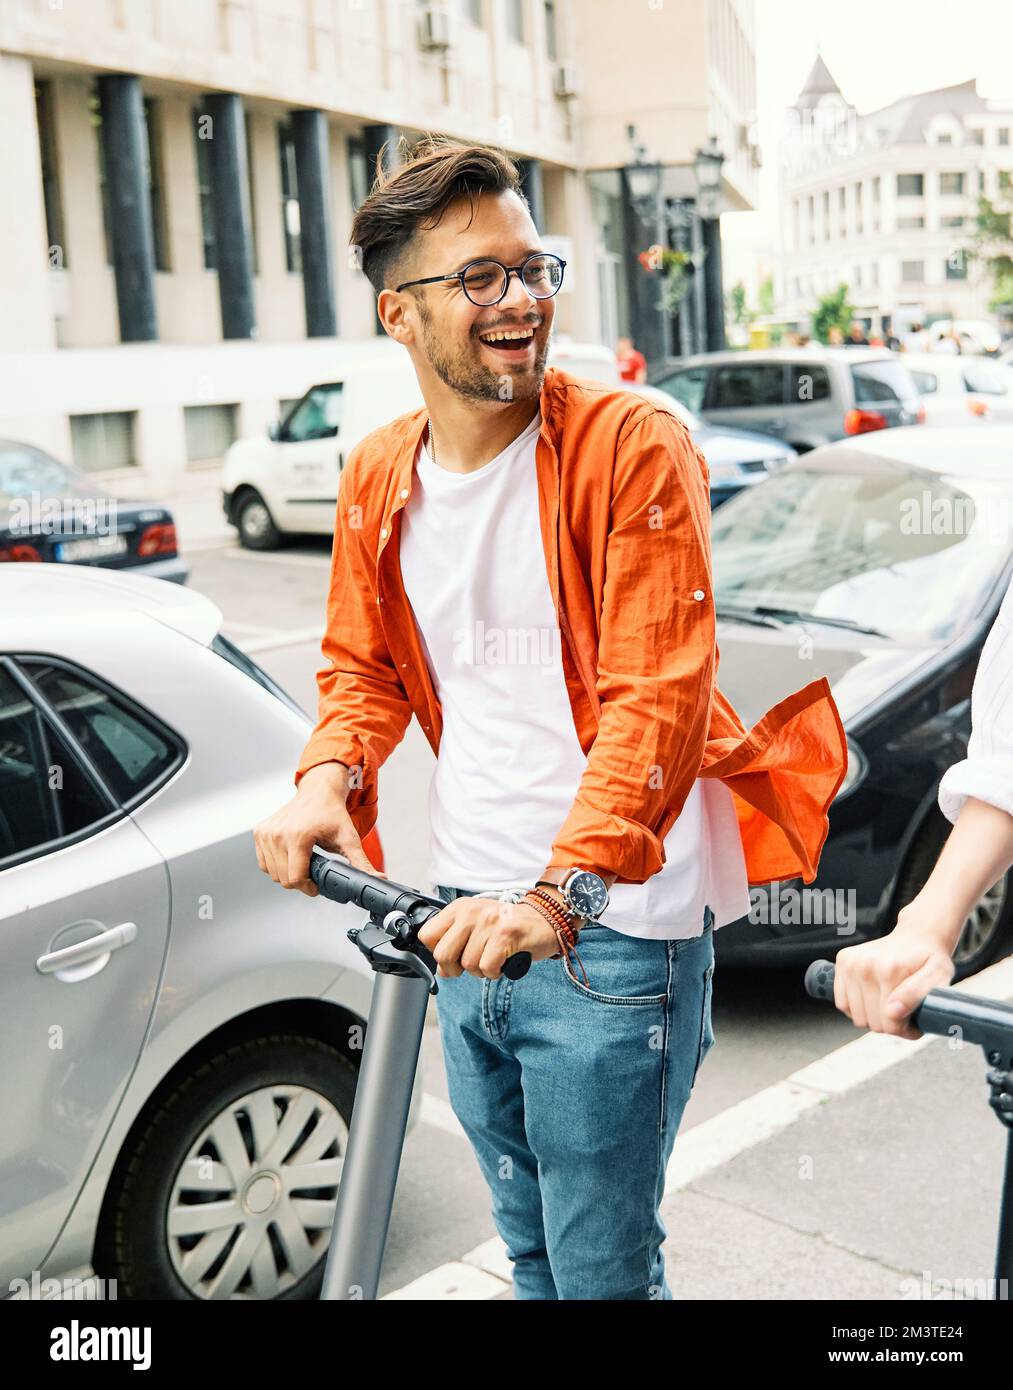 couple young man boy guy electric scooter city transport riding technology lifestylestreet friend driving modern Stock Photo